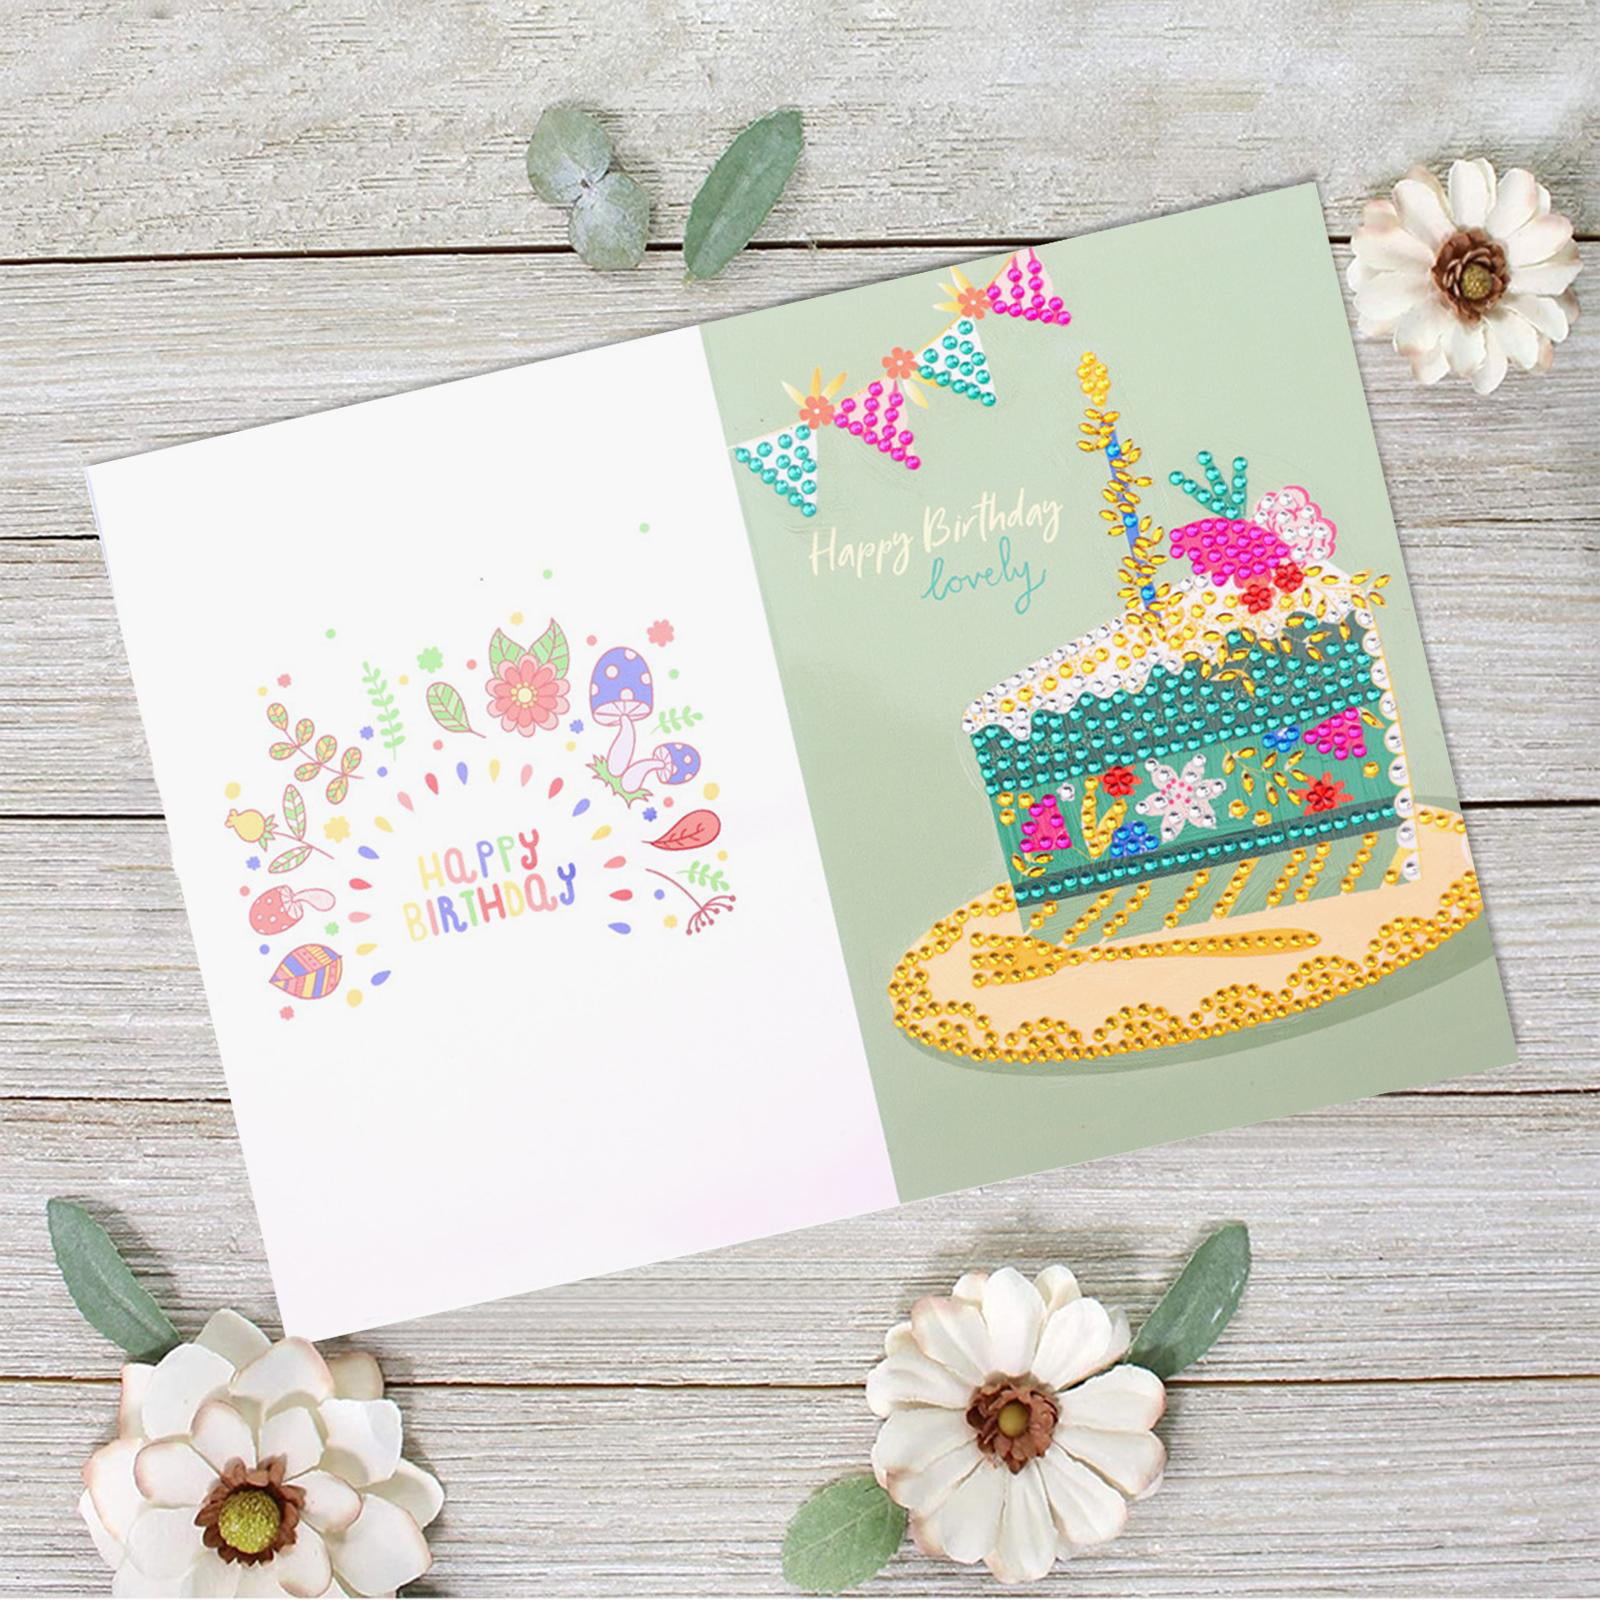 Easy Birthday Card Making With Paper, Handmade Greeting Card, Paper Craft  @devoartsandcrafts4787